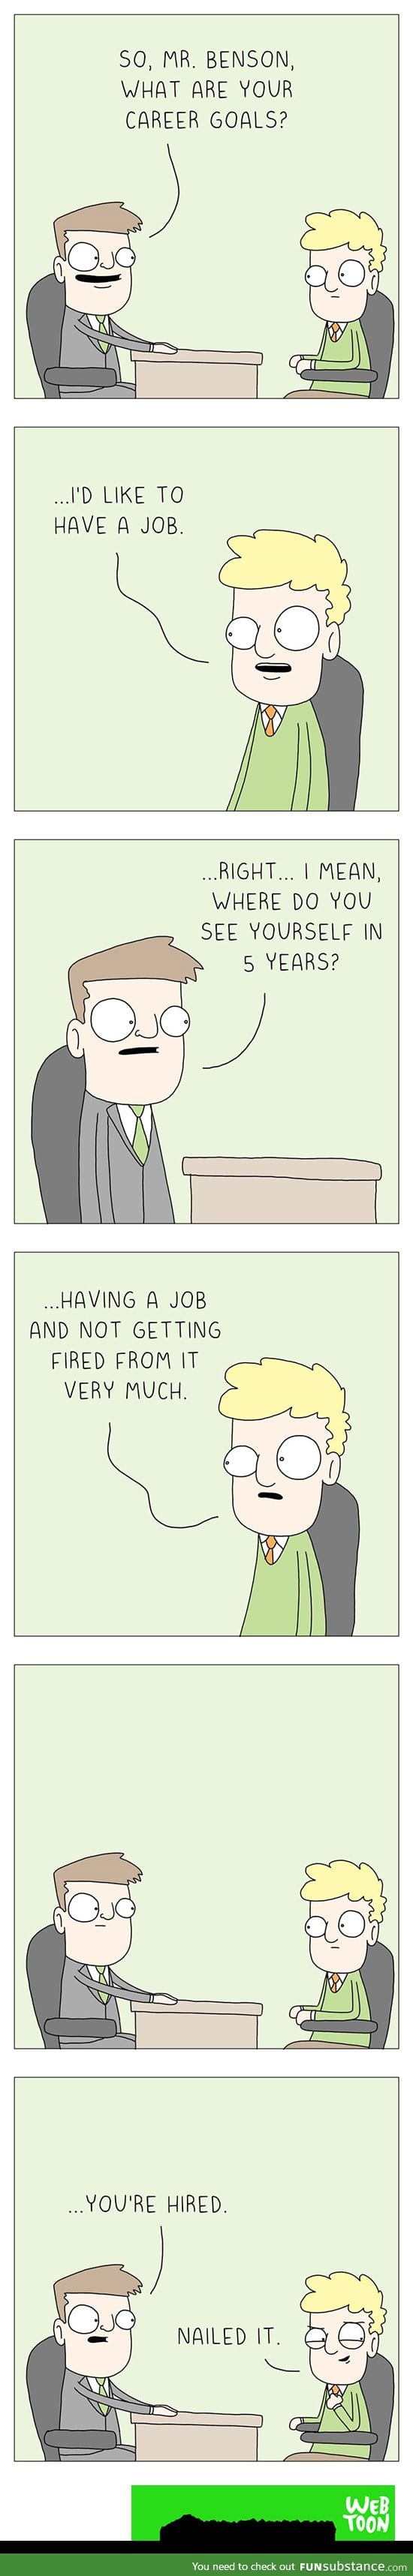 How to get a job